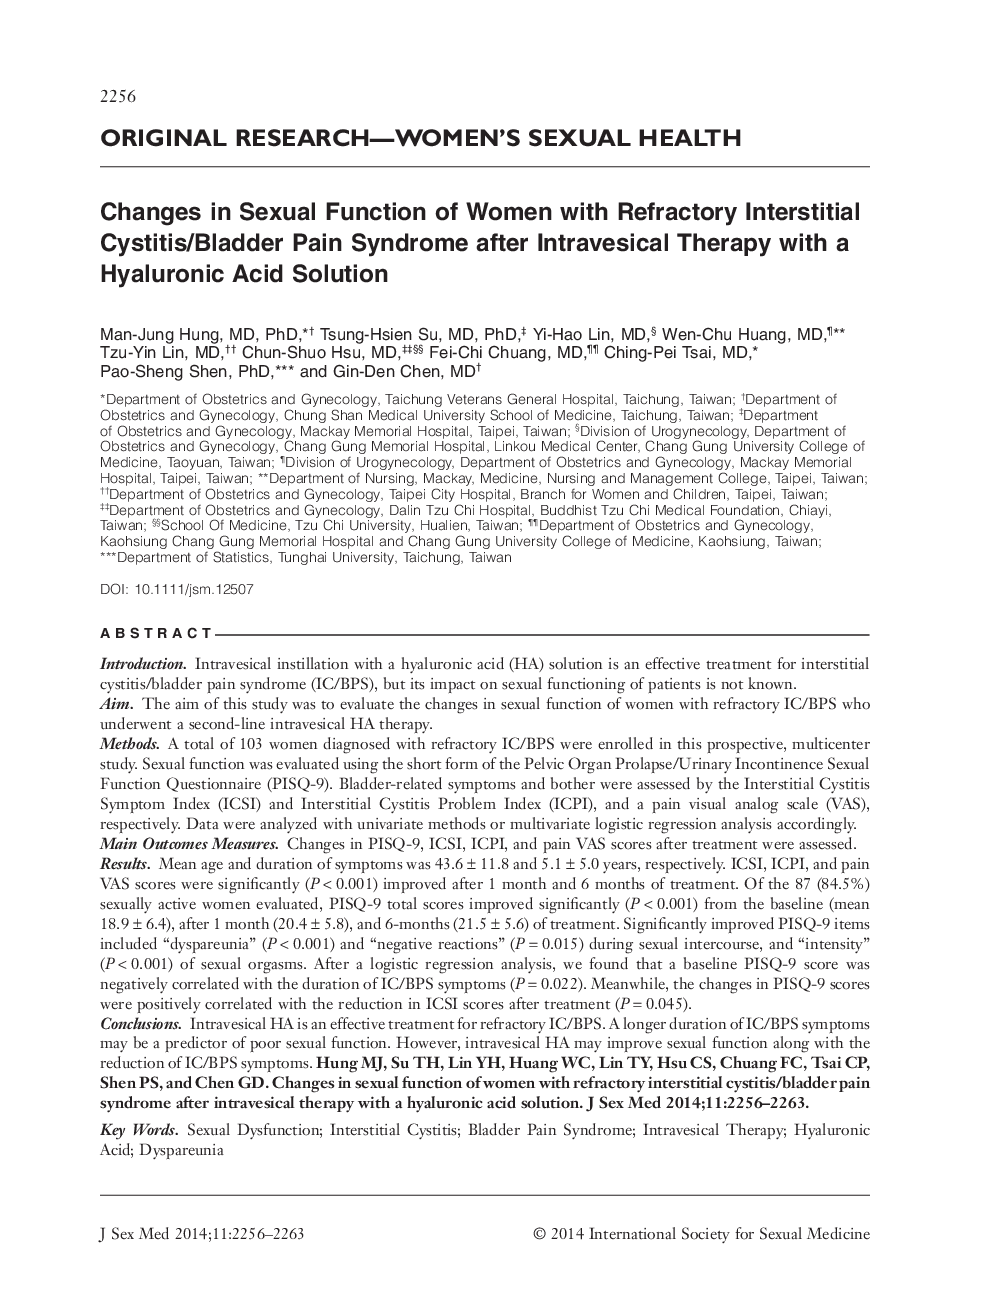 Changes in Sexual Function of Women with Refractory Interstitial Cystitis/Bladder Pain Syndrome after Intravesical Therapy with a Hyaluronic Acid Solution